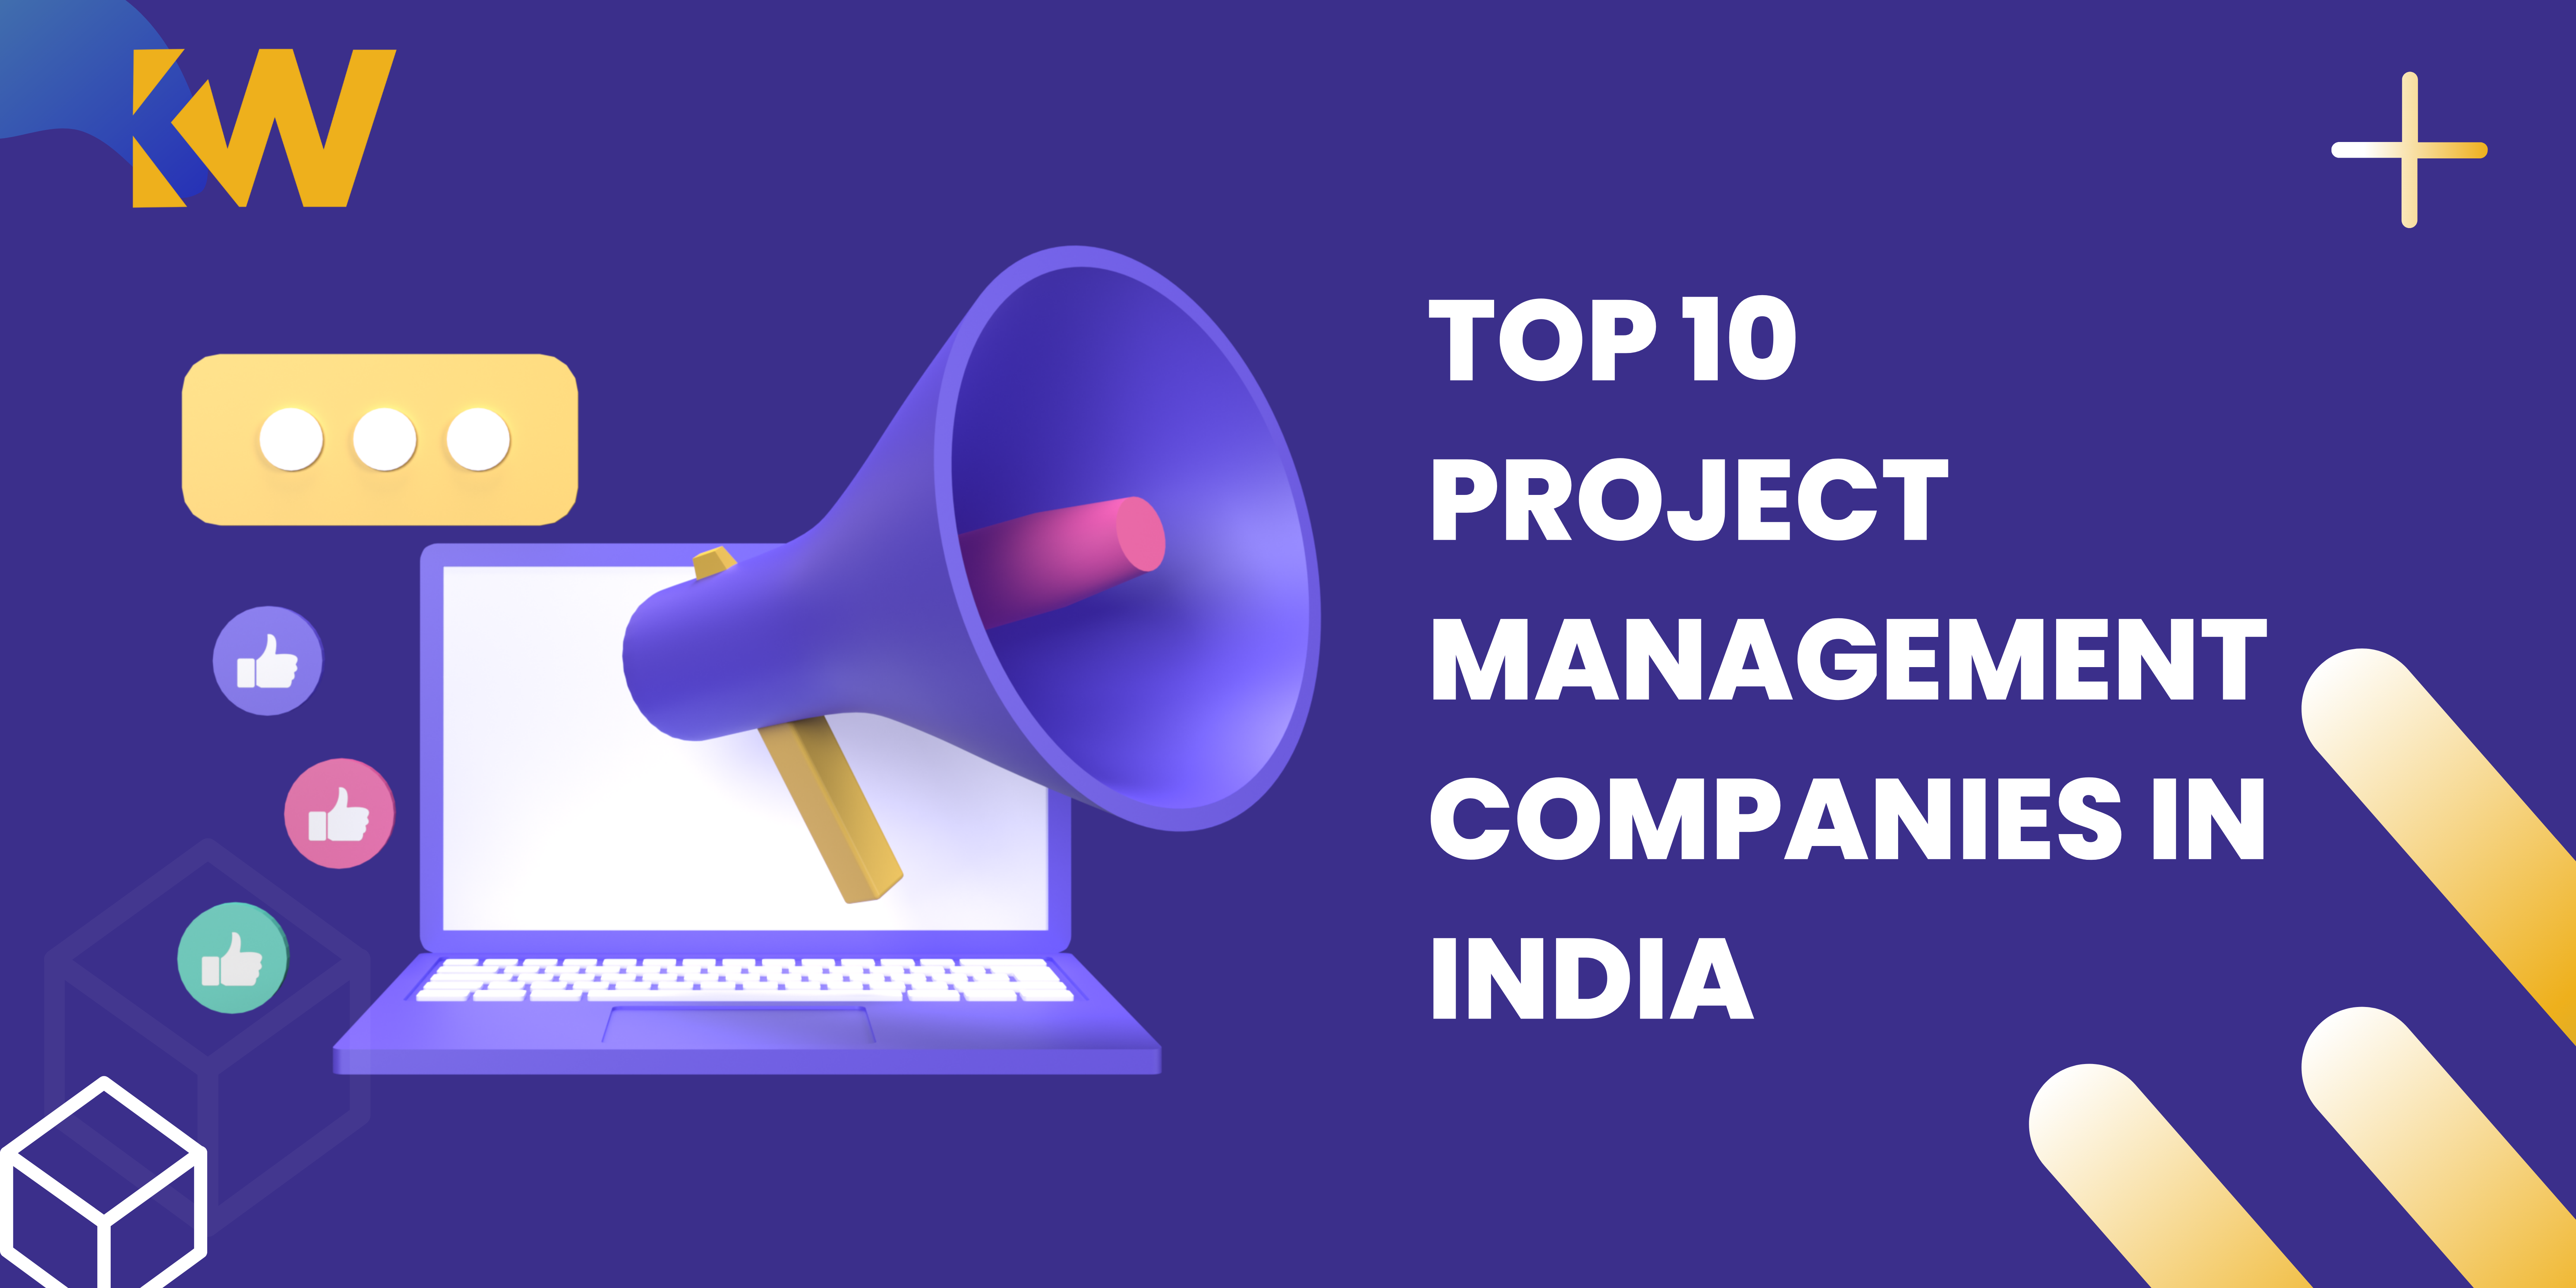 Top 10 Project Management Companies in India